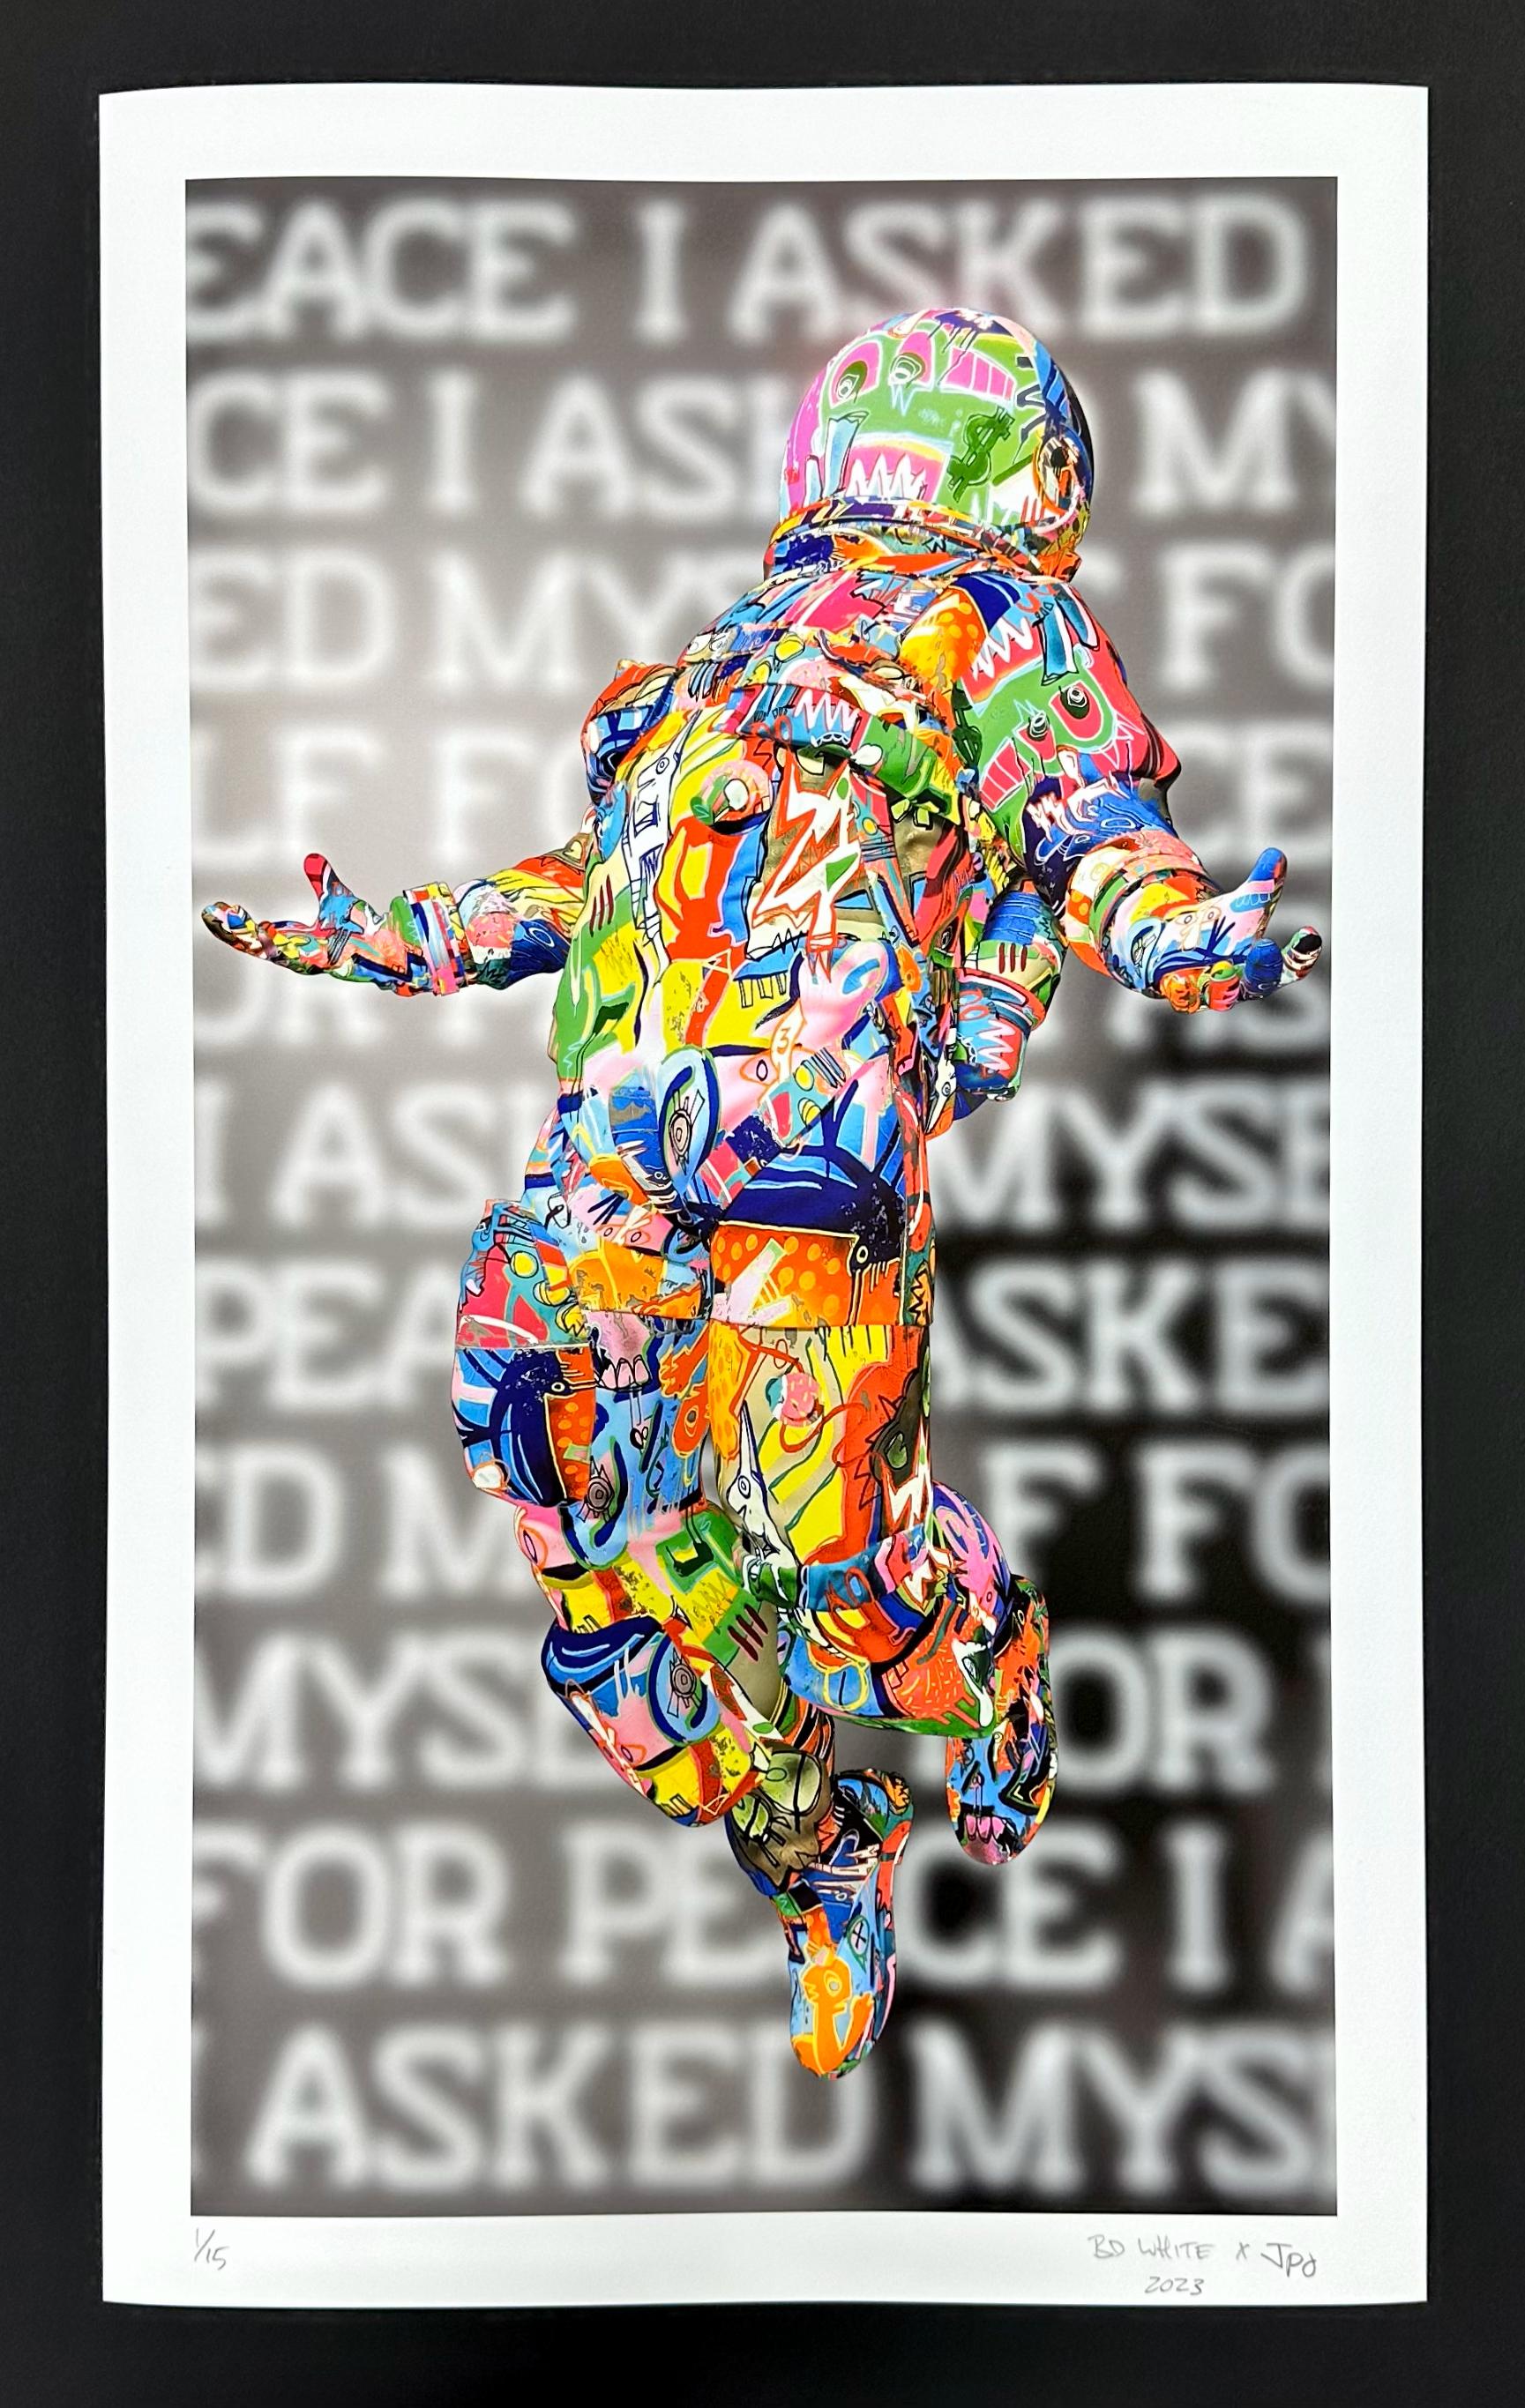 Collaboration print with BD White & JPO

Archival Pigment print

24 x 14.5 inches

Limited Edition out of 15

Signed by BD White & JPO